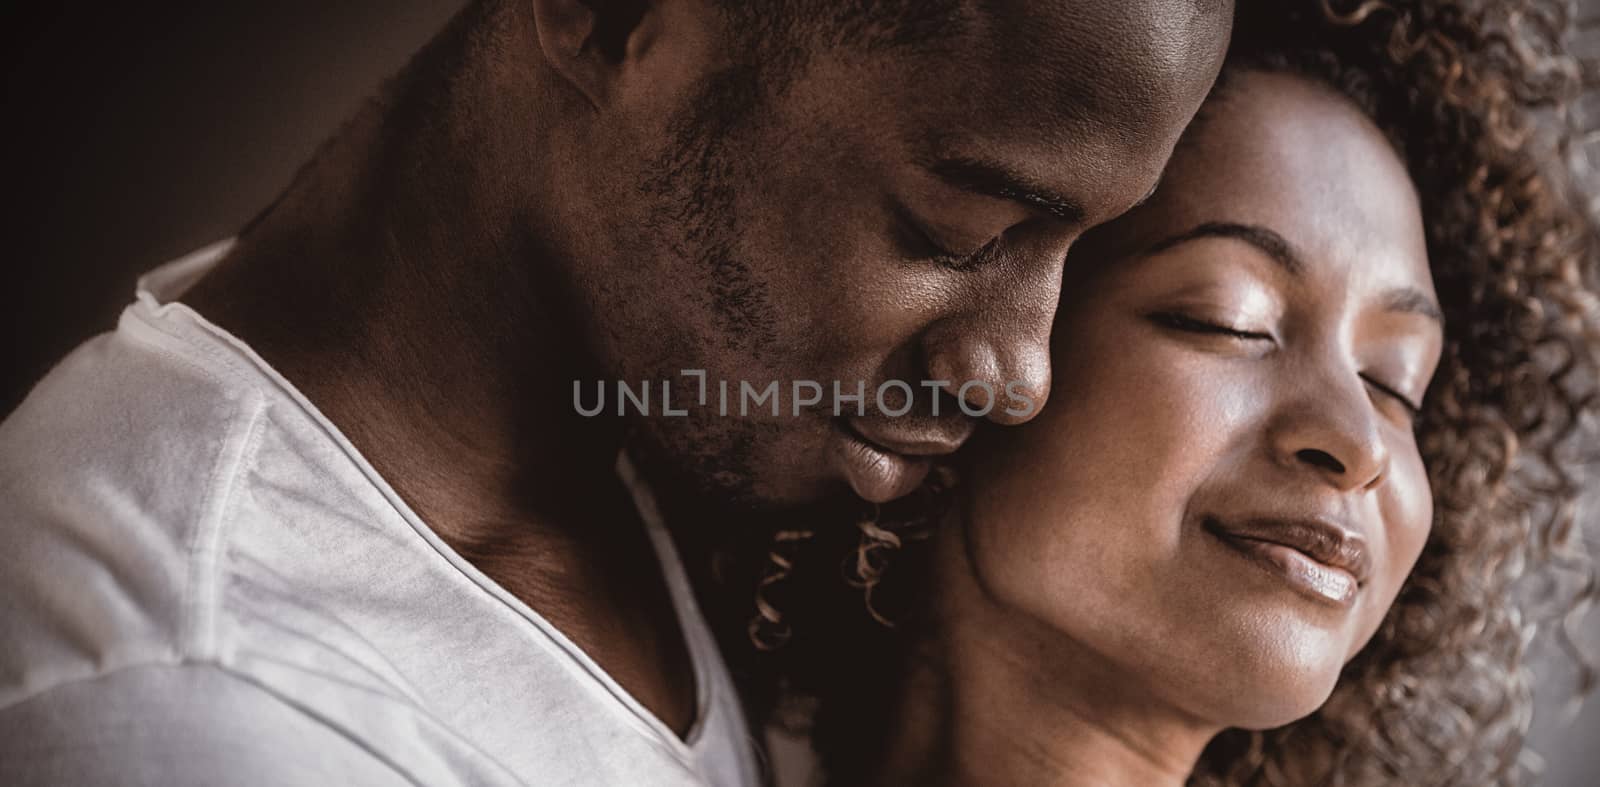 Young couple embracing together by Wavebreakmedia